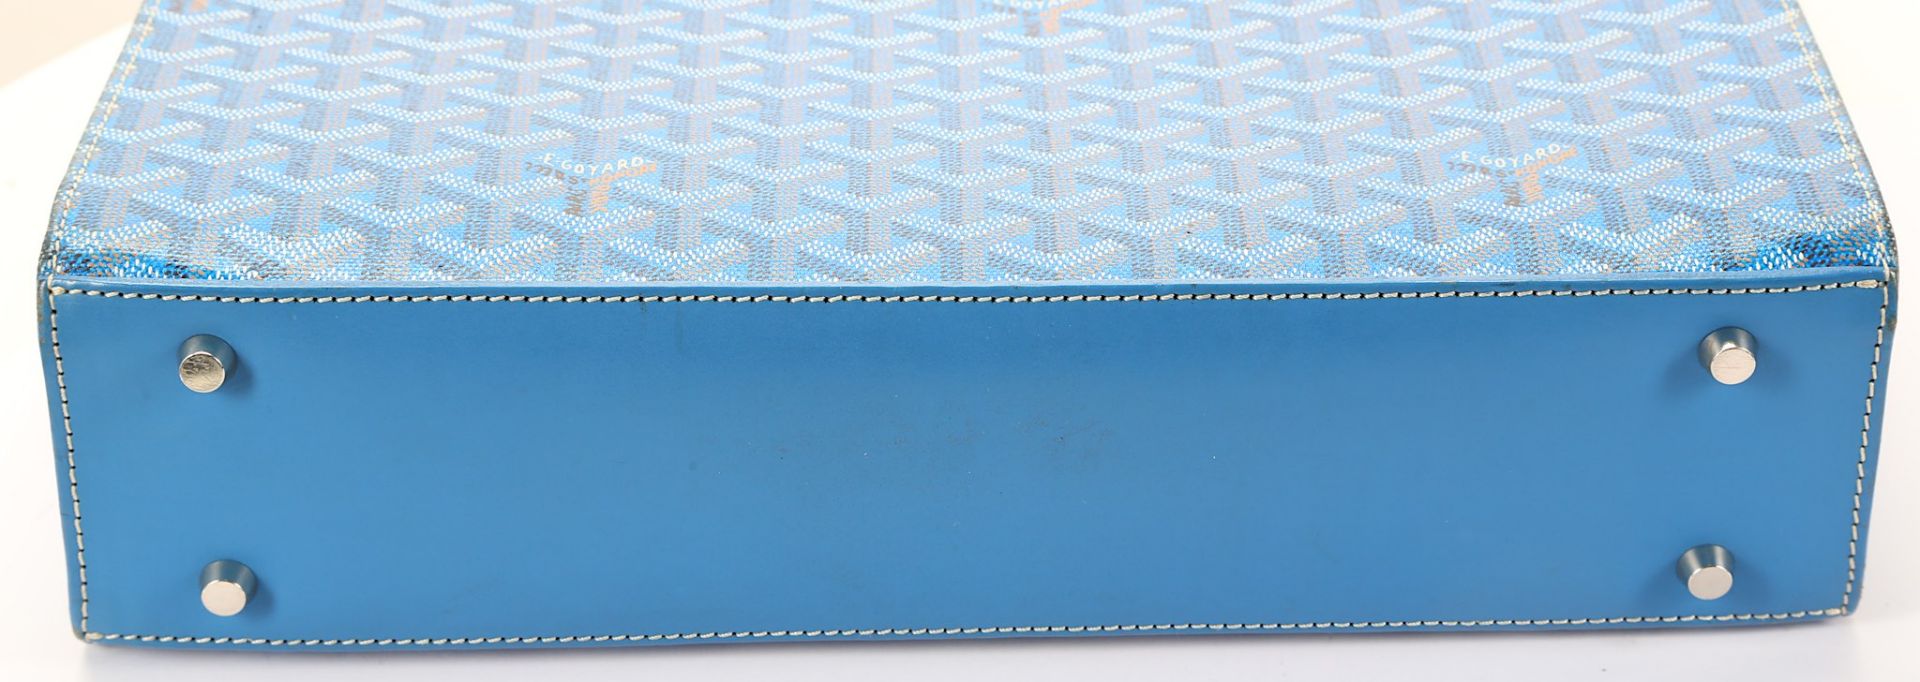 Goyard Blue Comores Tote Bag, hand painted coated - Image 4 of 5